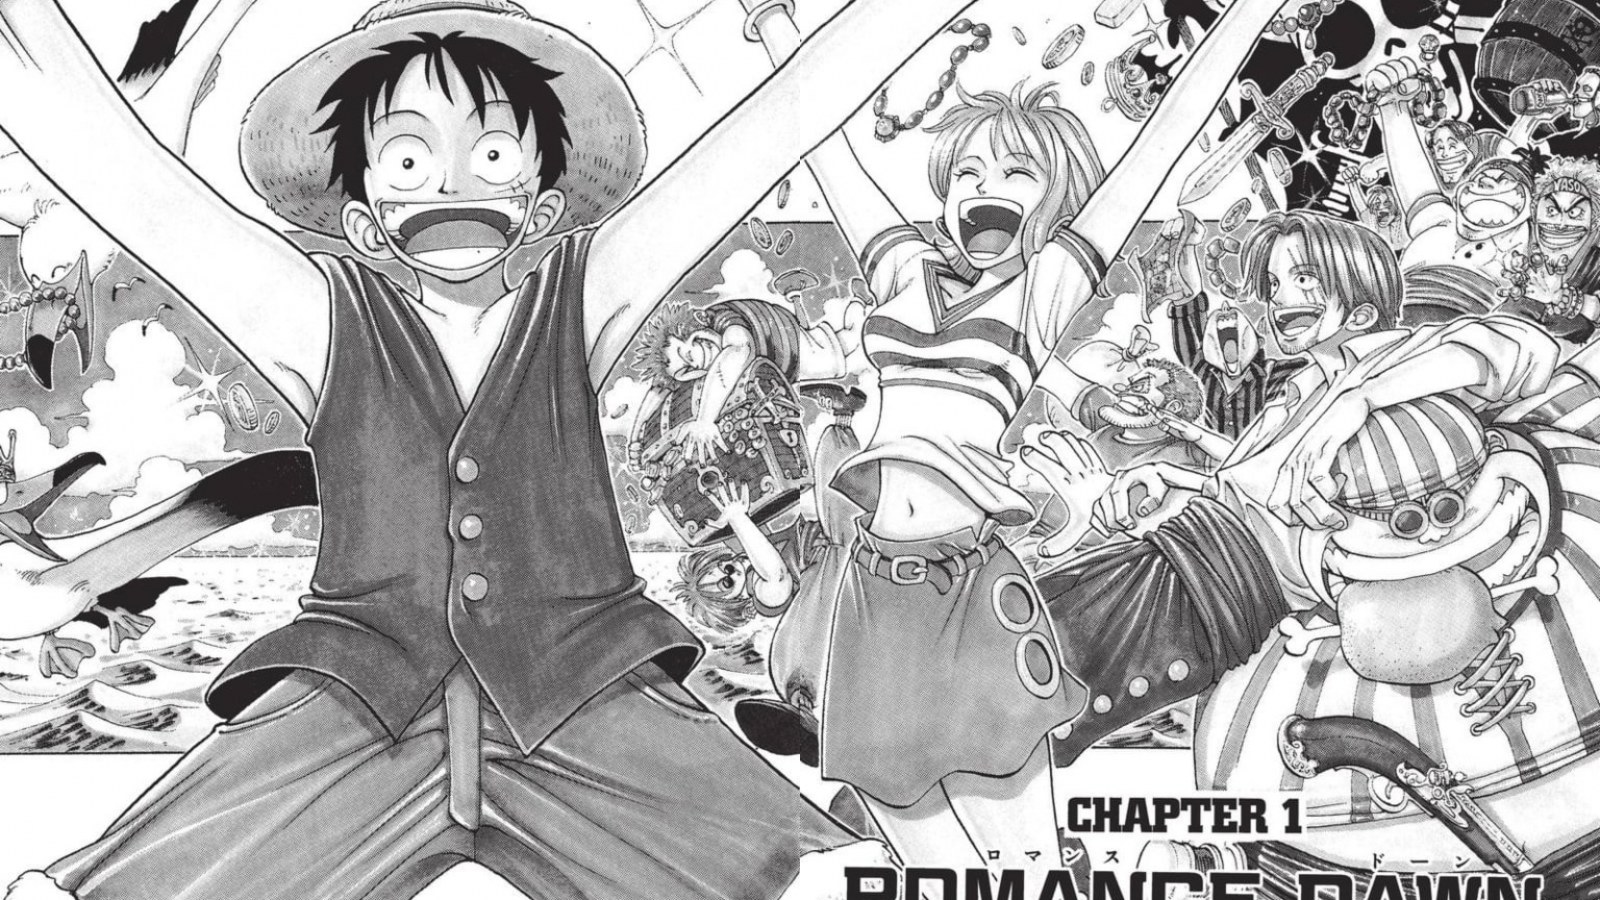 Is the 'One Piece' Manga Taking a Break? Why 'One Piece' Is